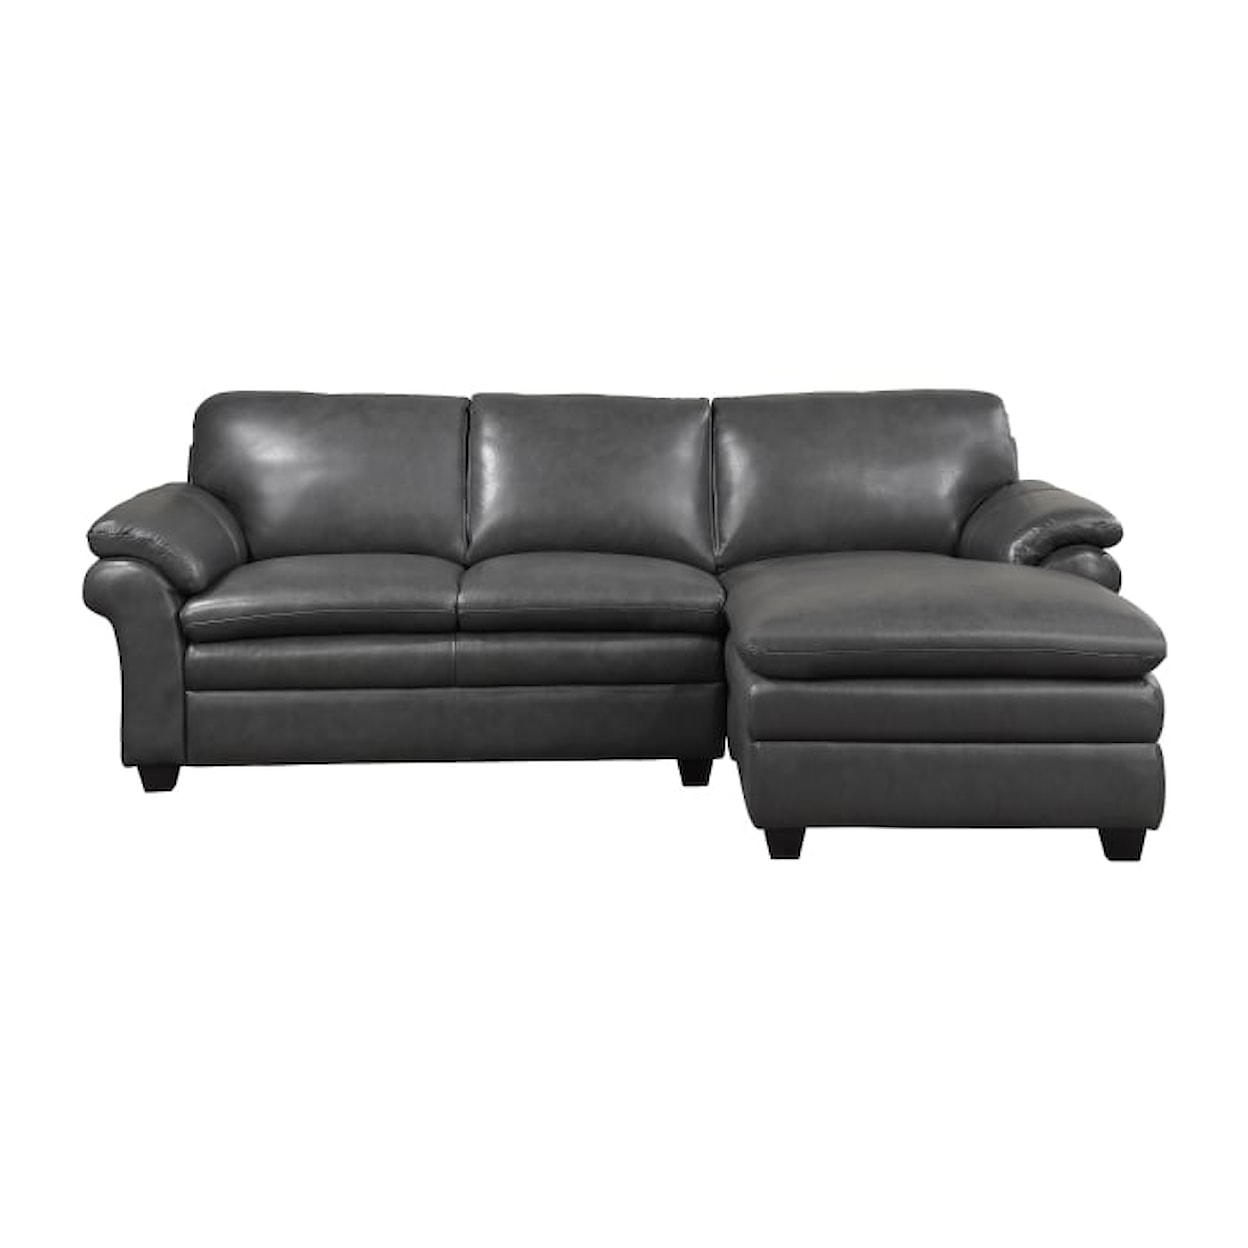 Homelegance Furniture Exton 2-Piece Sectional with Right Chaise